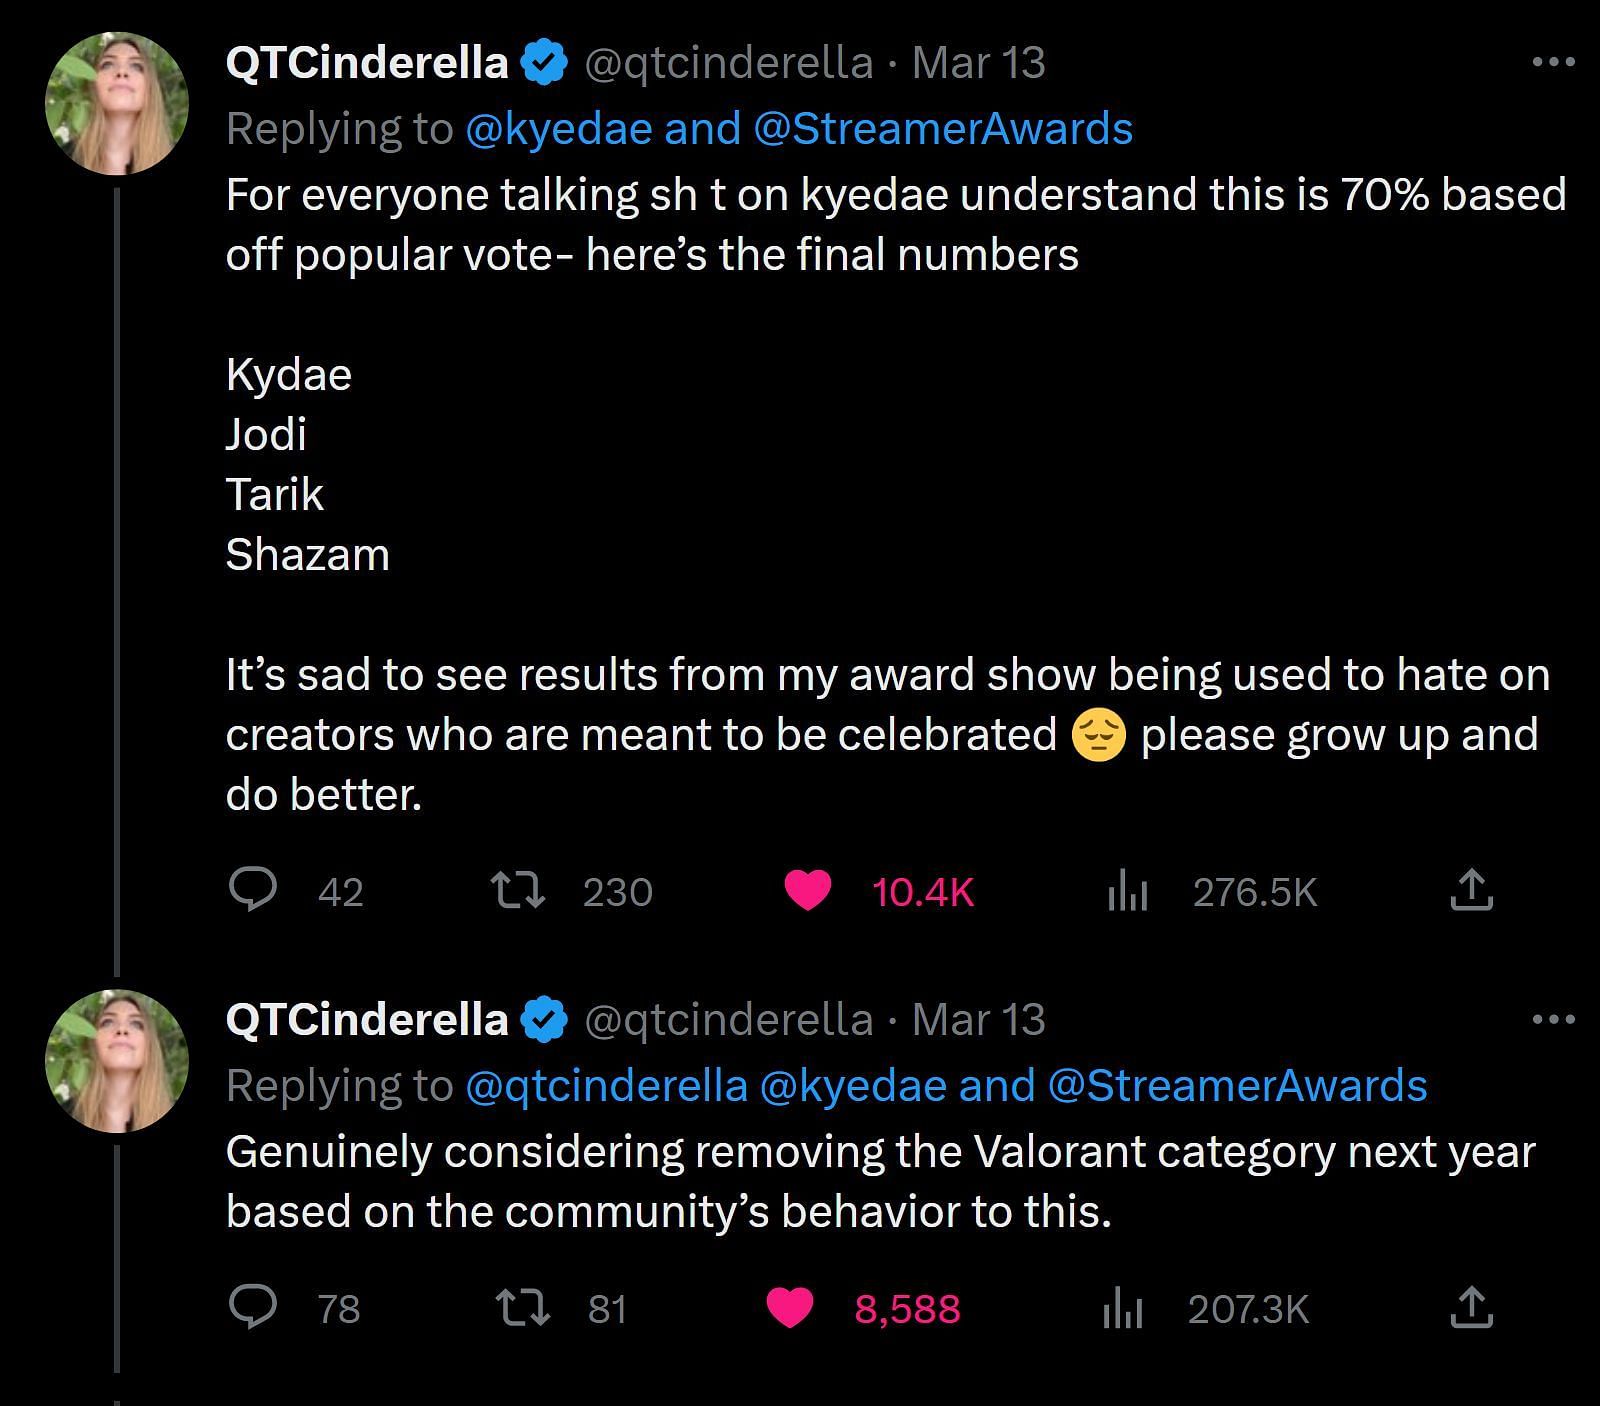 Valkyrae Clears Unnecessary Beef With QTCinderella in the Most